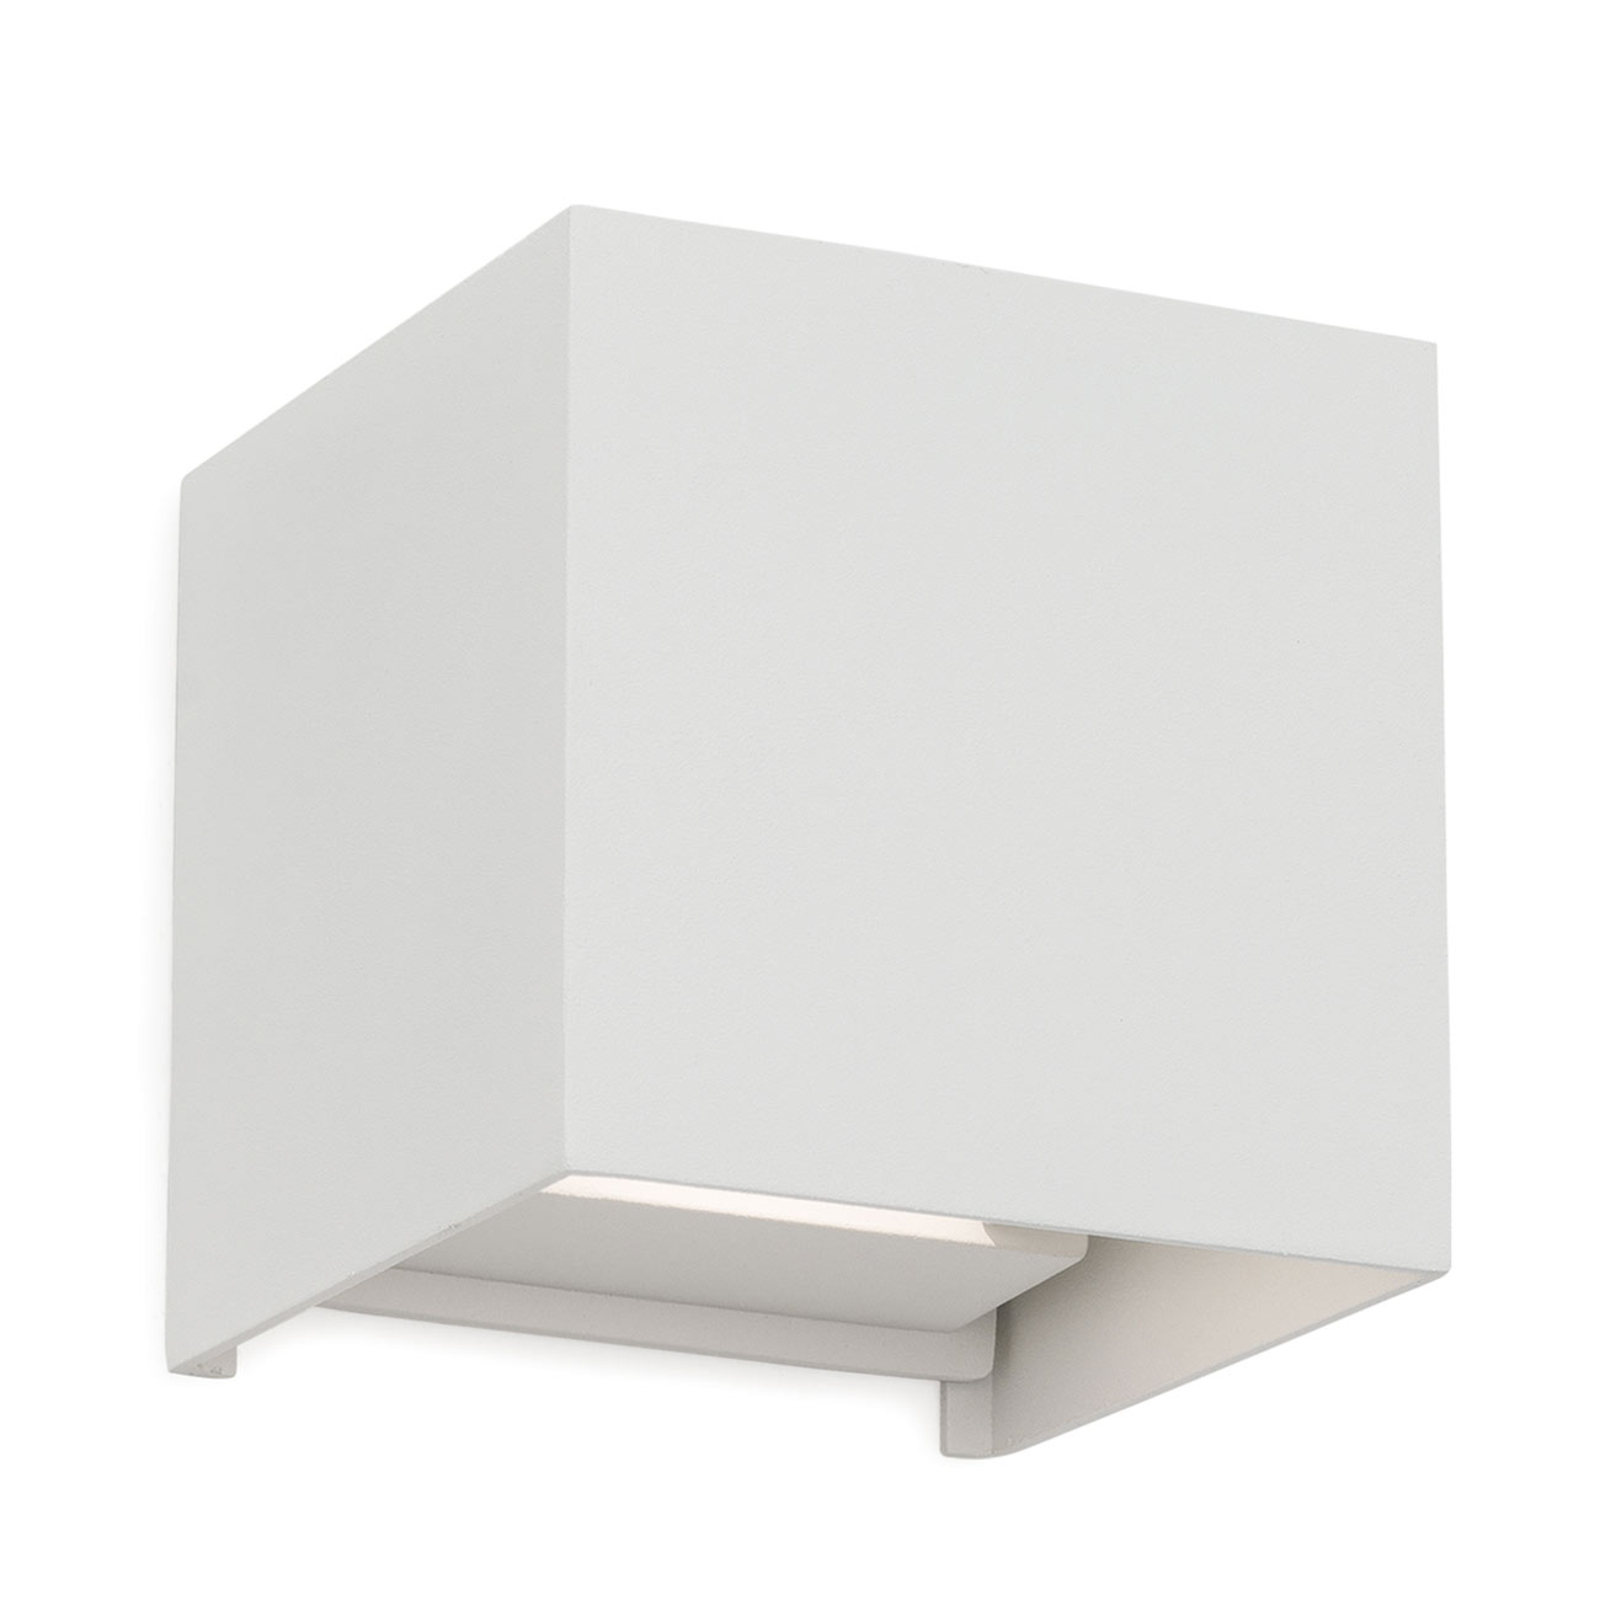 Cube-shaped LED outdoor wall light Cube in white